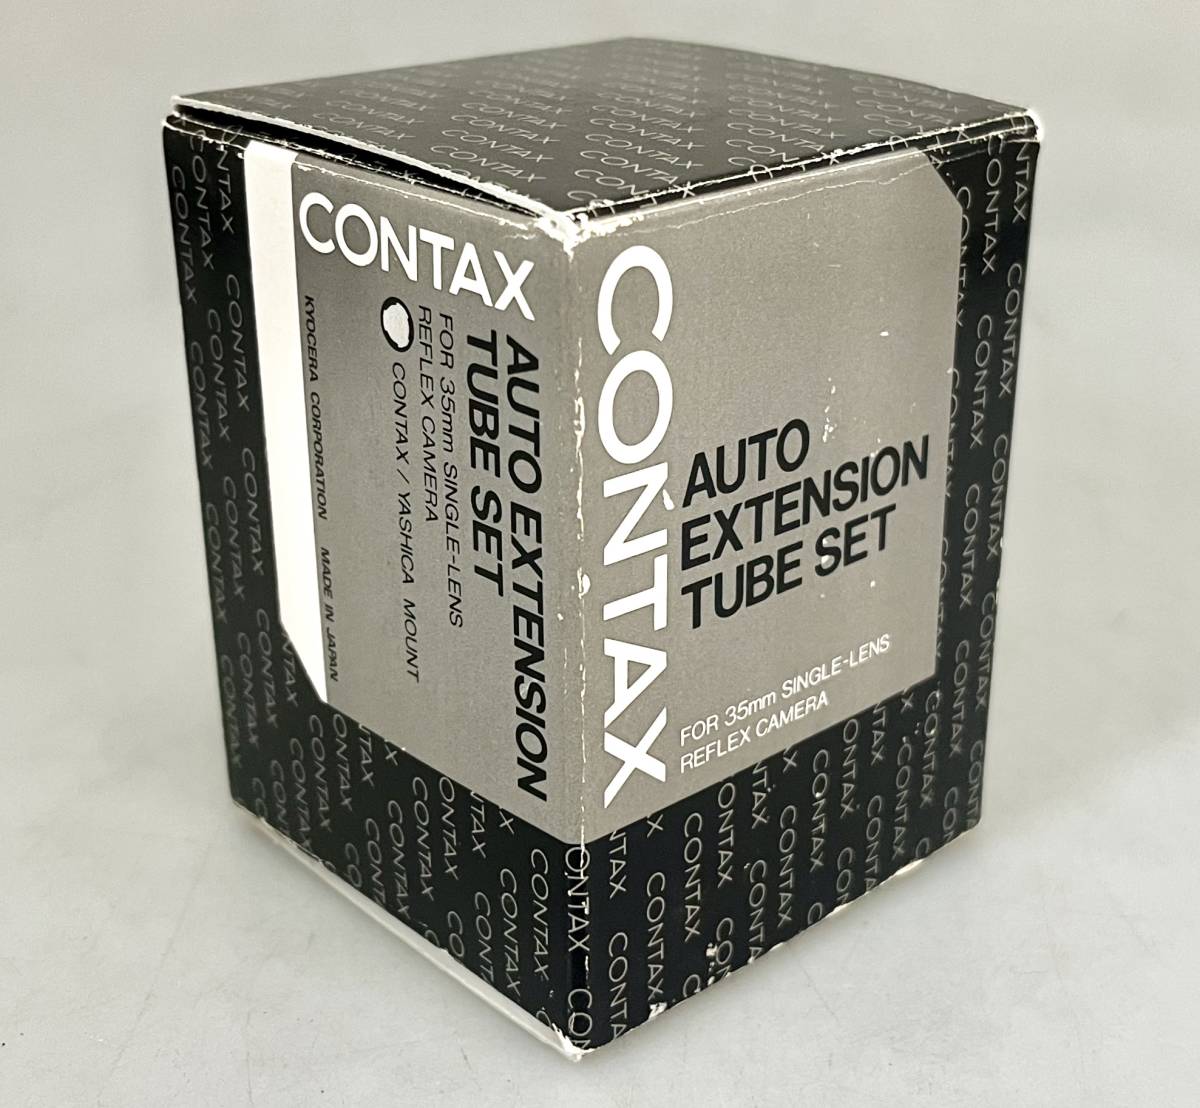 ☆ CONTAX コンタックス オート接写 リング 3点セット AUTO EXTENSION TUBE SET 13mm 20mm 27mm ★_画像7